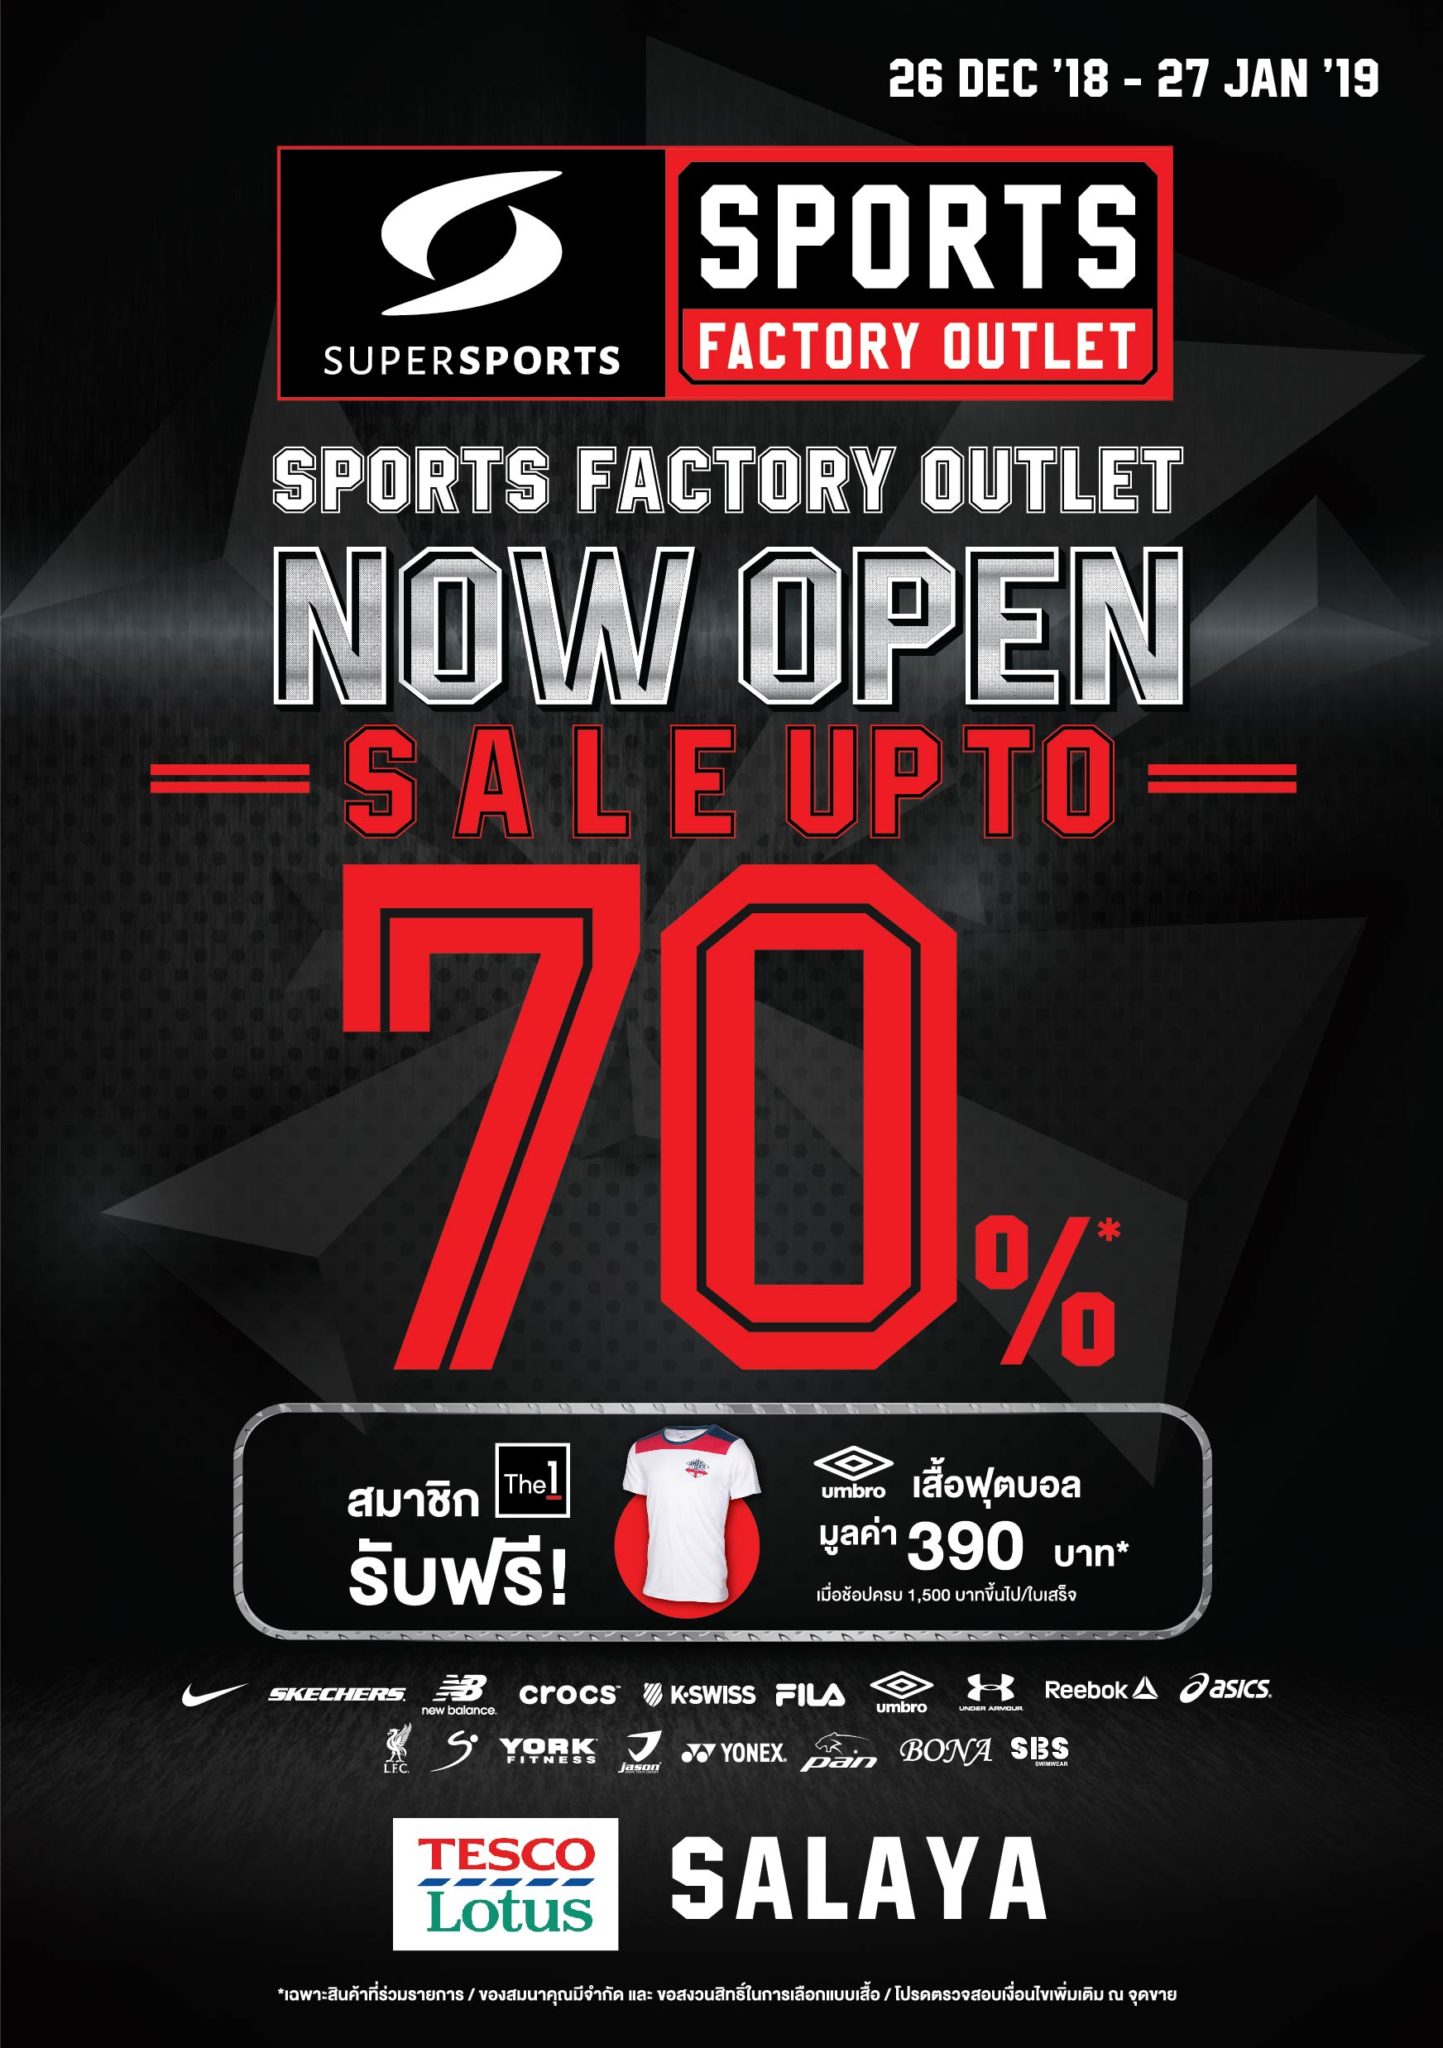 Supersports Sports Factory Outlet